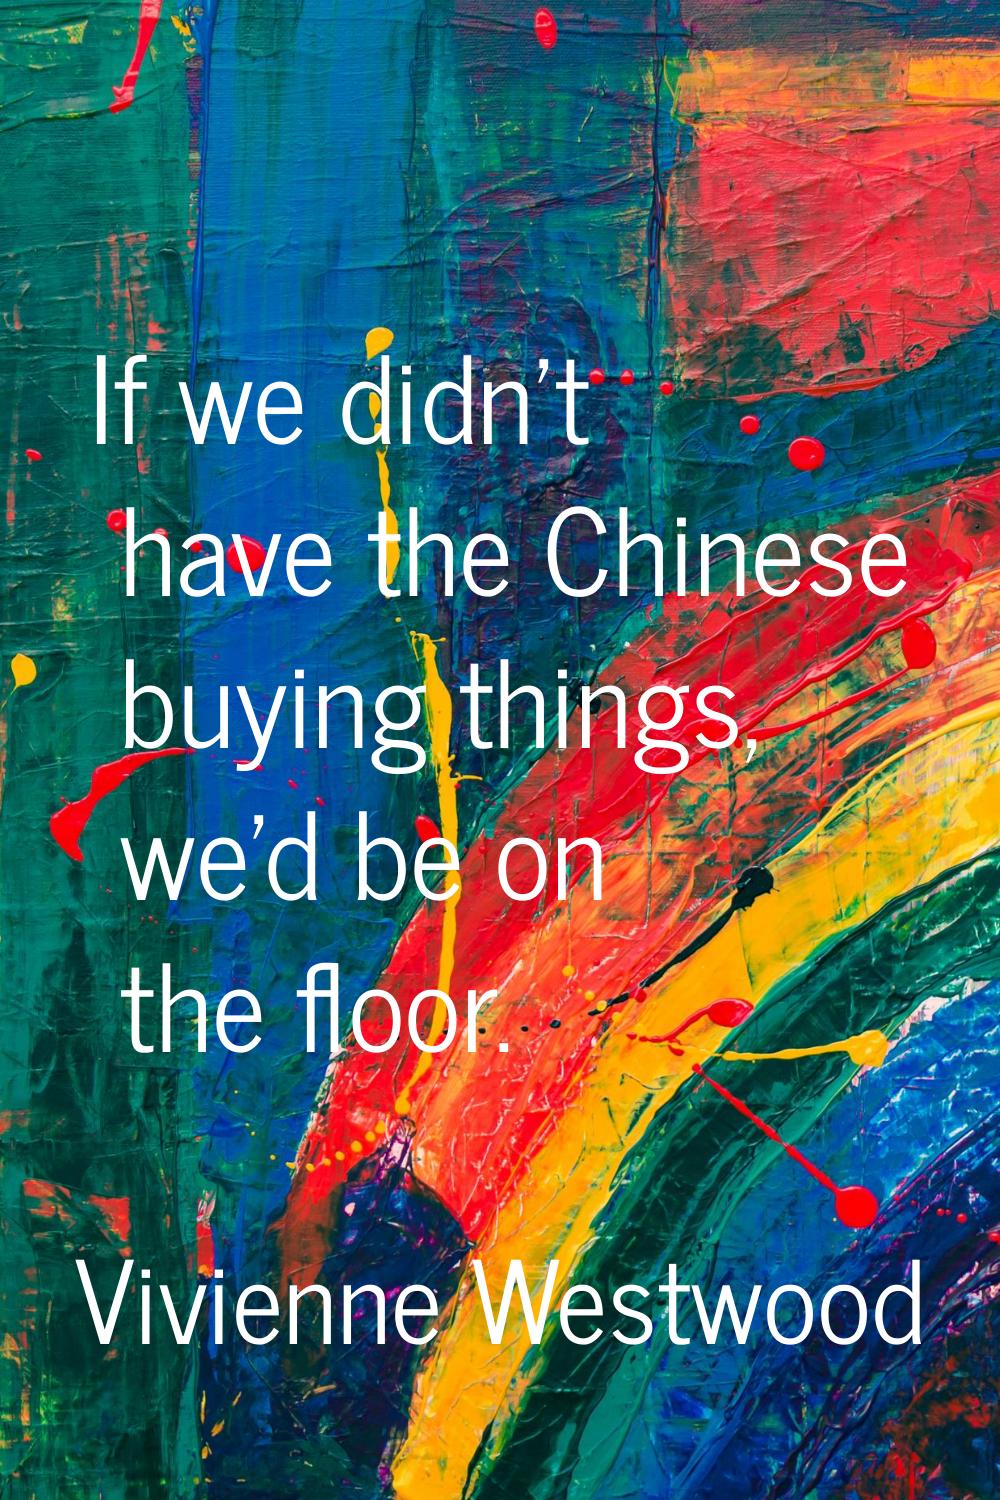 If we didn't have the Chinese buying things, we'd be on the floor.